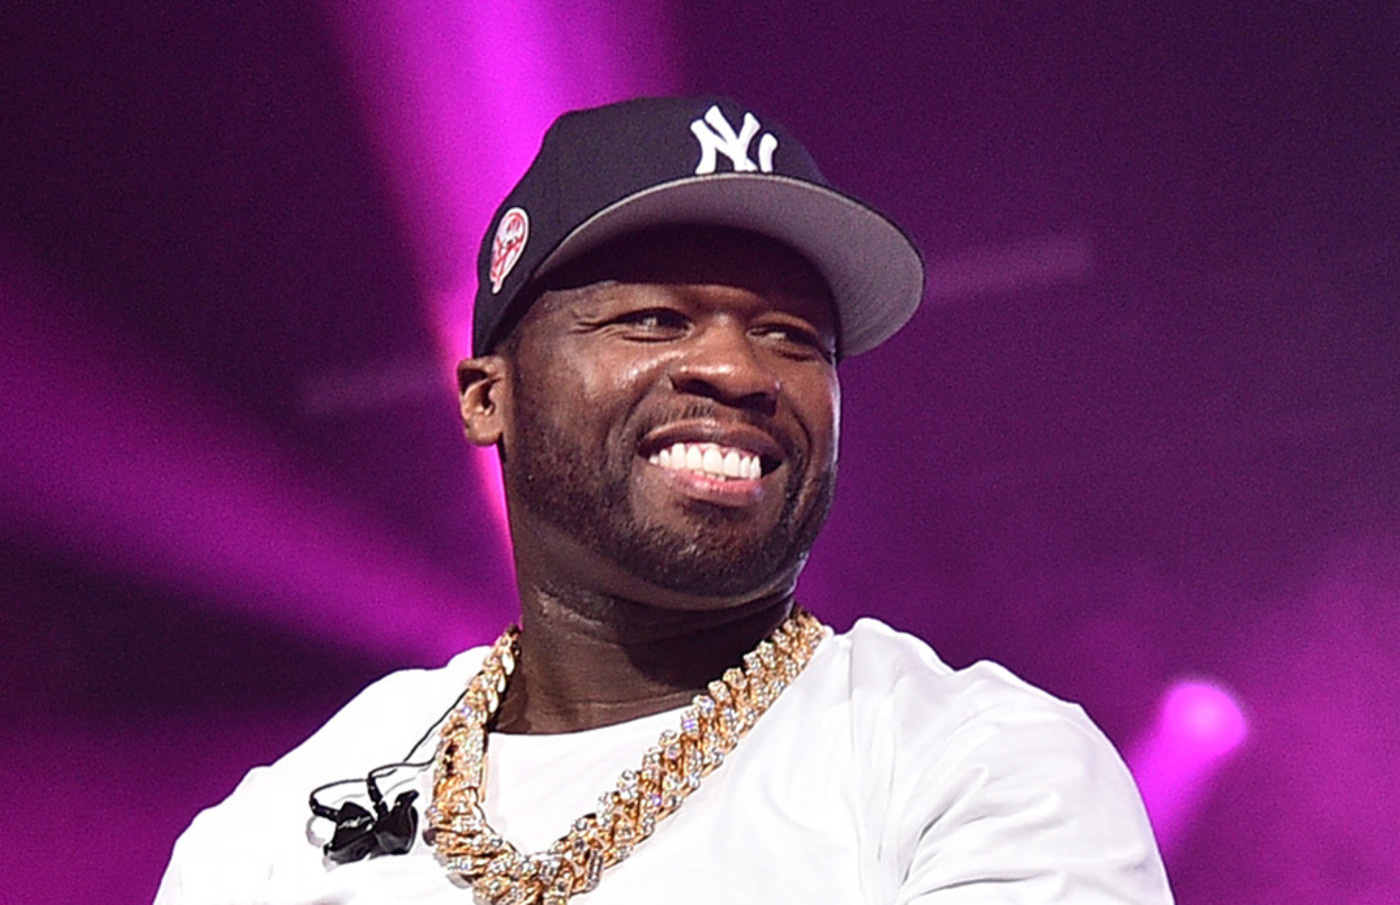 50 Cent: News, Albums, Songs & Interviews